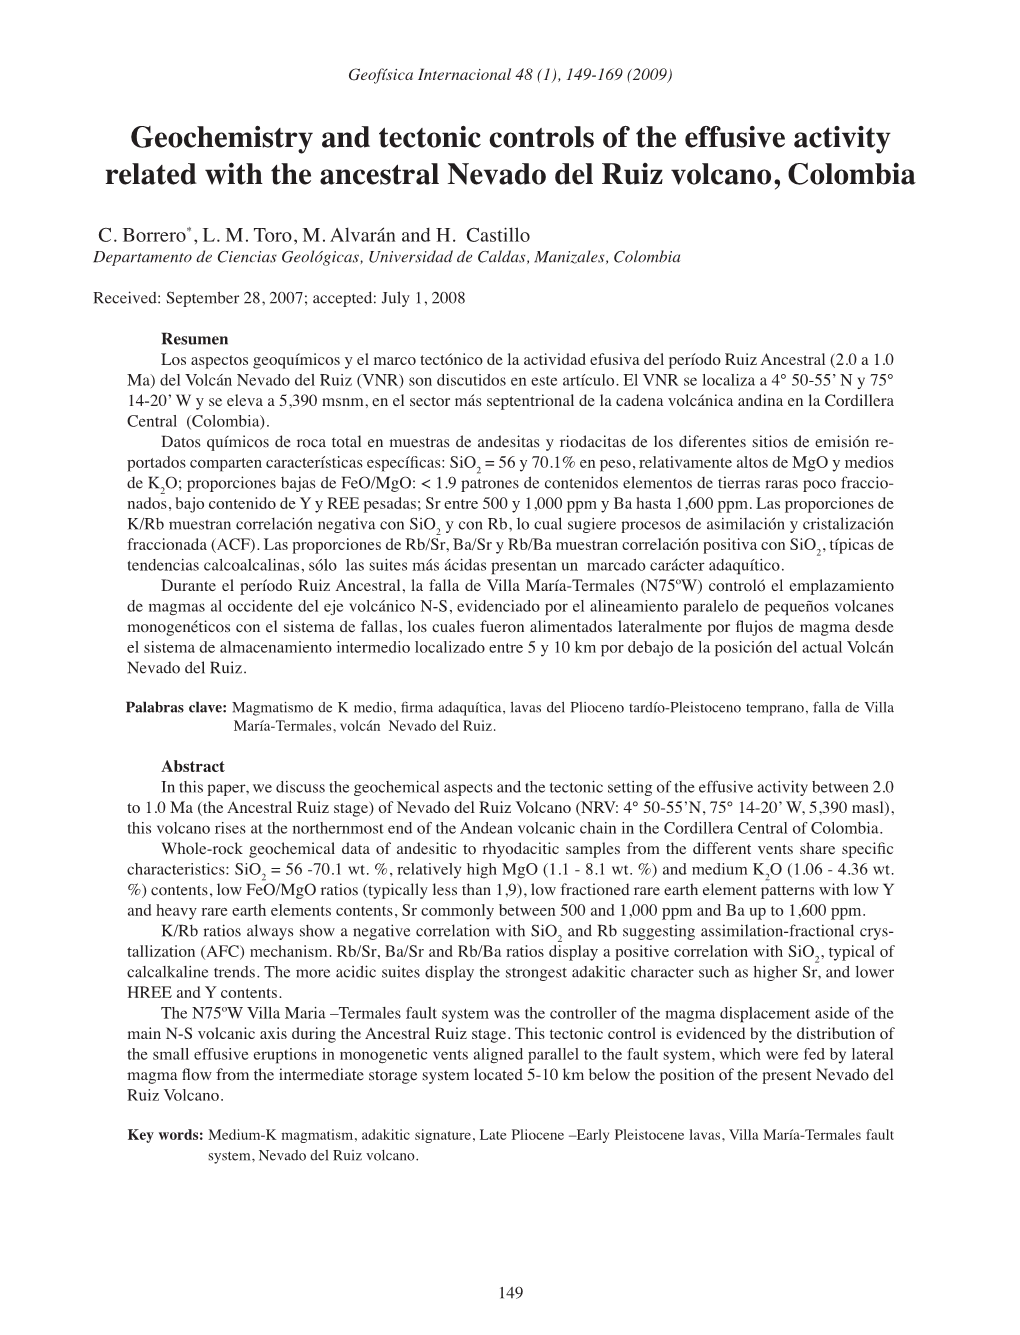 Geochemistry and Tectonic Controls of the Effusive Activity Related with the Ancestral Nevado Del Ruiz Volcano, Colombia